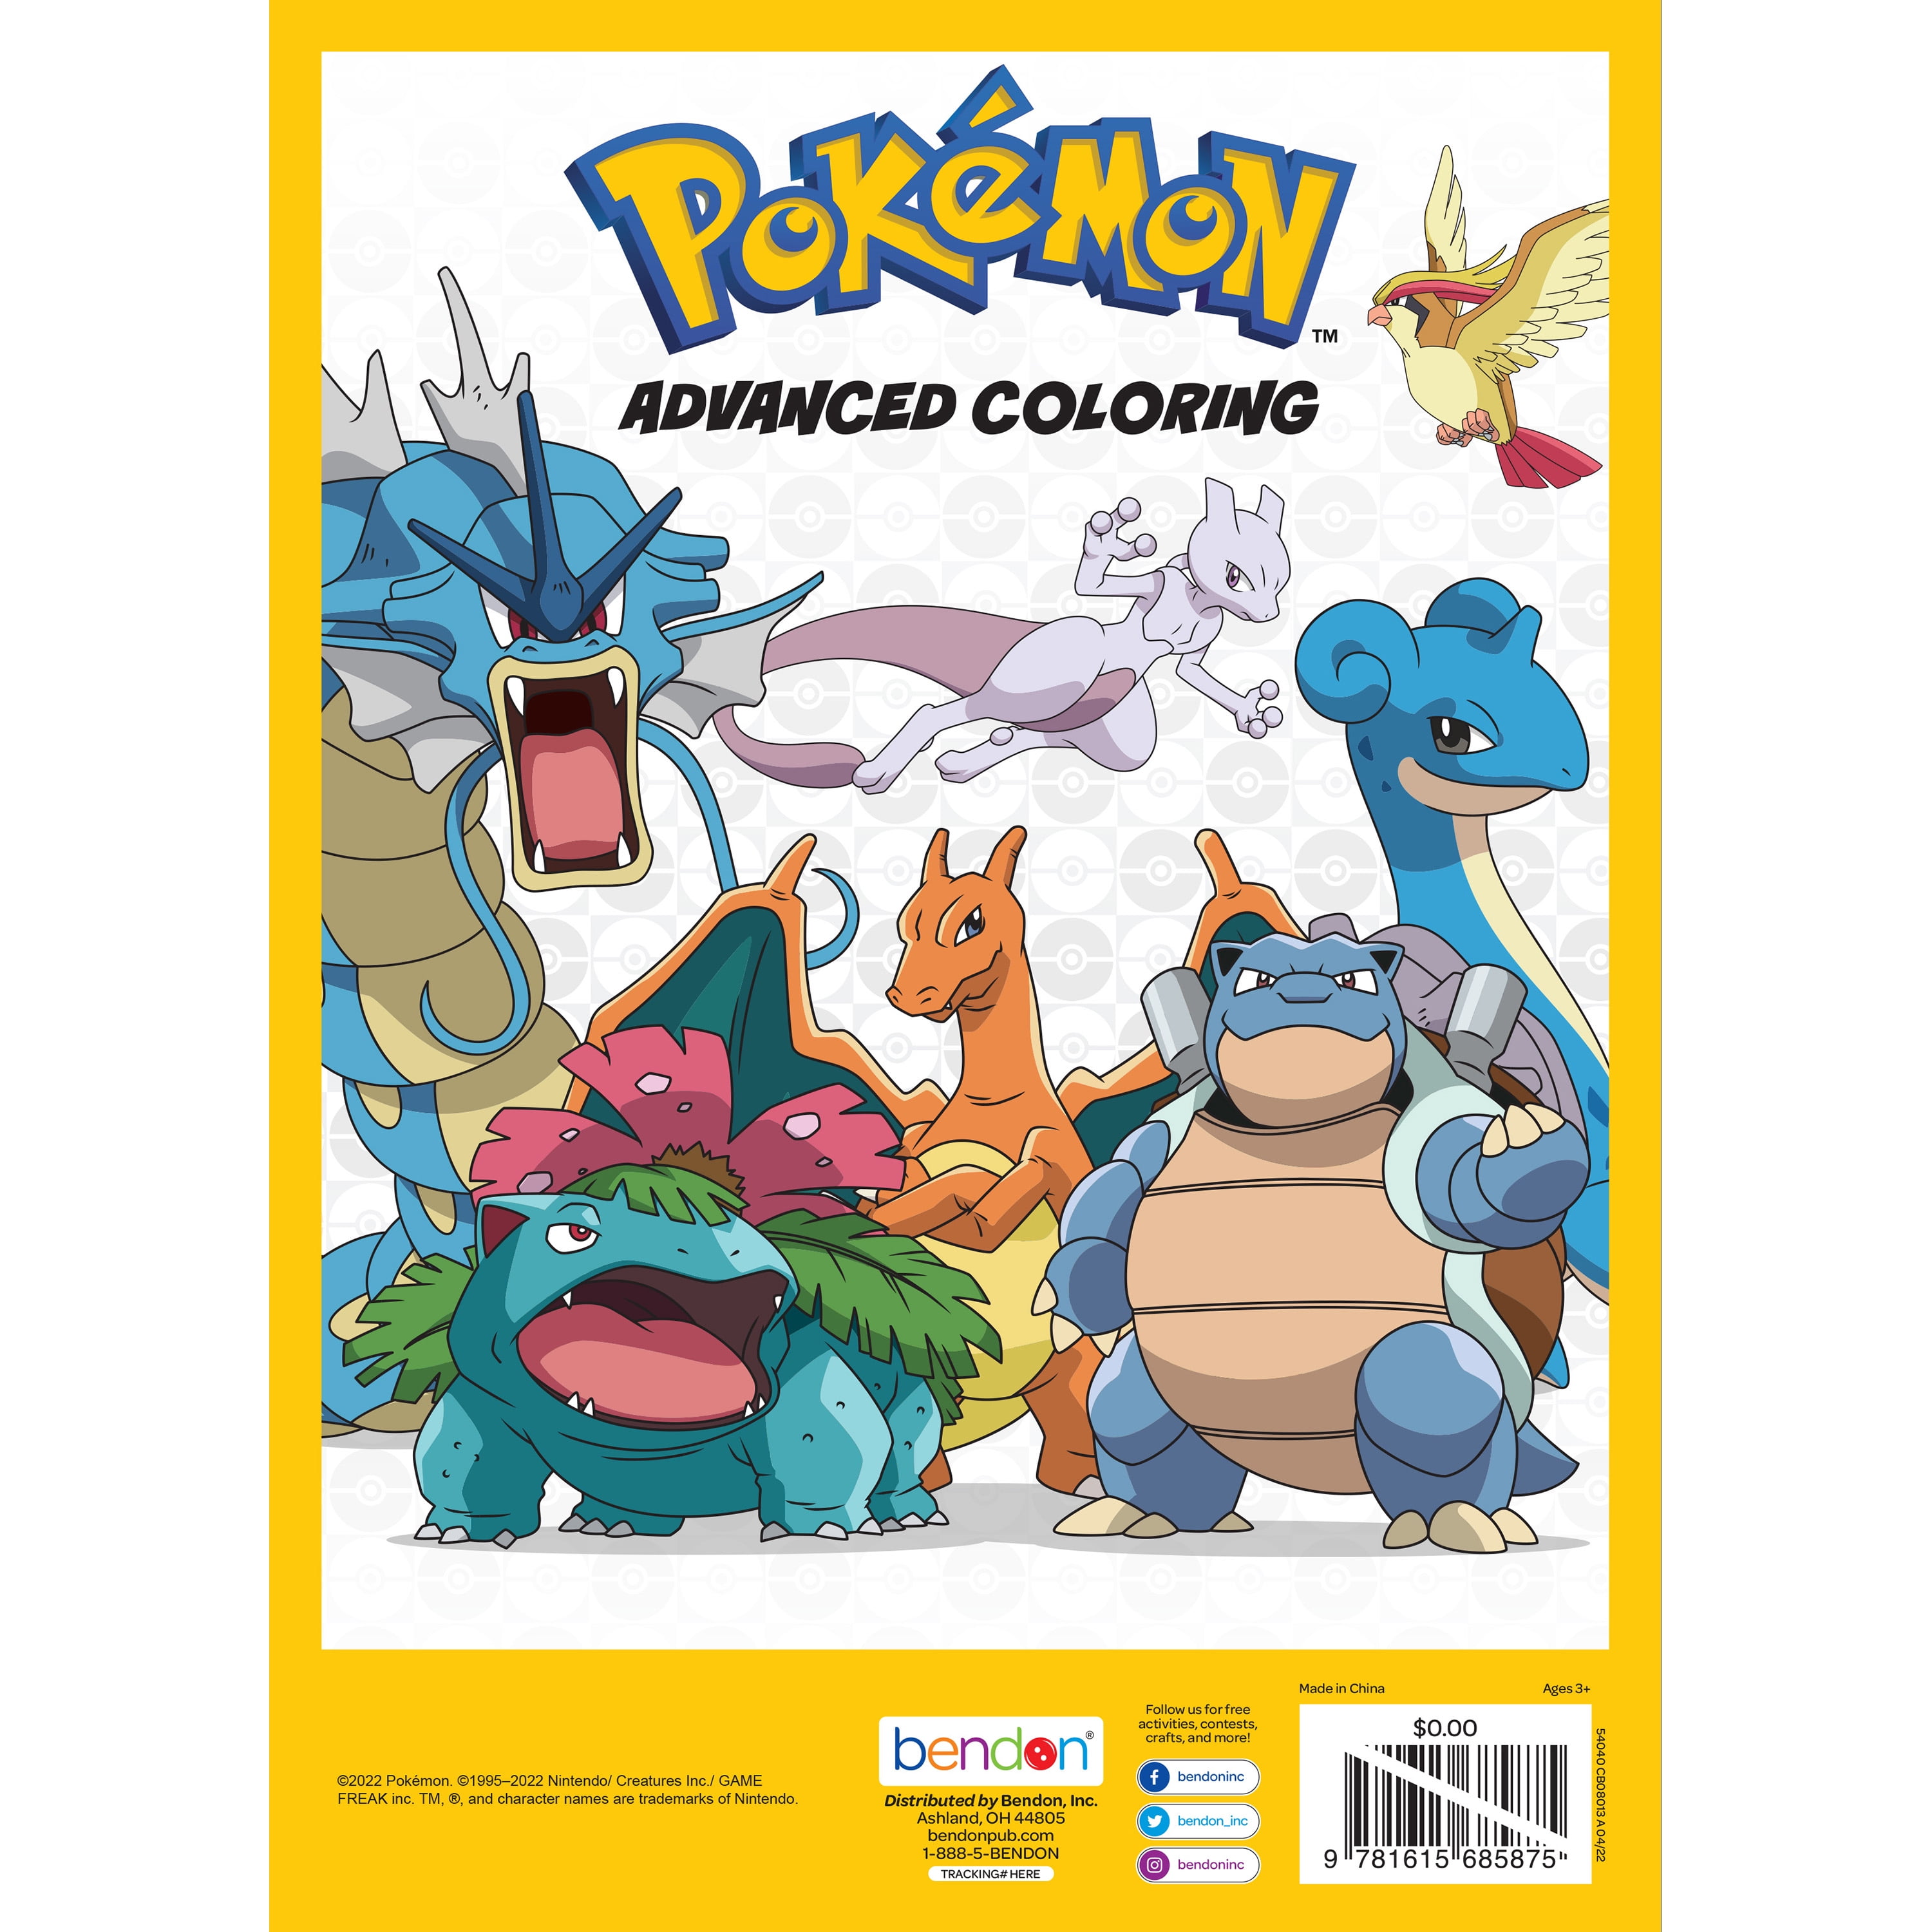 Give 400 pokemon coloring book pages digital by Ricardovangaal